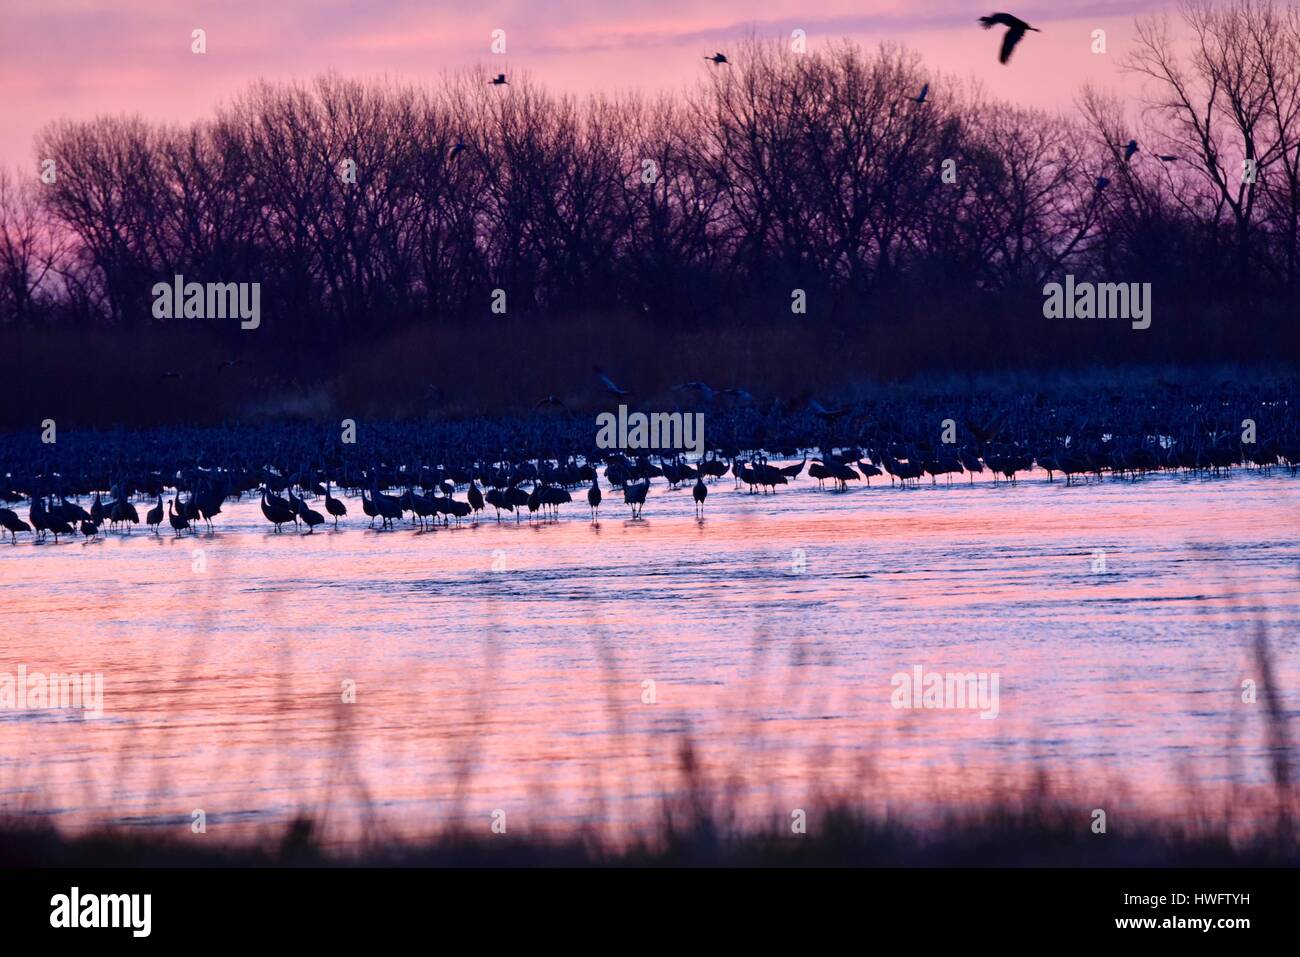 Wood River, Nebraska, USA,  20th March, 2017. Among the world's great animal migrations, the Sandhill Cranes awake and take off at property managed by the Crane Trust, Wood River, Nebraska. The spring migration population of sandhill cranes in the Central Nebraska Flyway is estimated at 650,000. More than 80 percent of the world's population of sandhill cranes converge on Nebraska's Platte River valley, a critical sliver of threatened habitat in North America's Central Flyway. Credit: John D. Ivanko/Alamy Live News Stock Photo